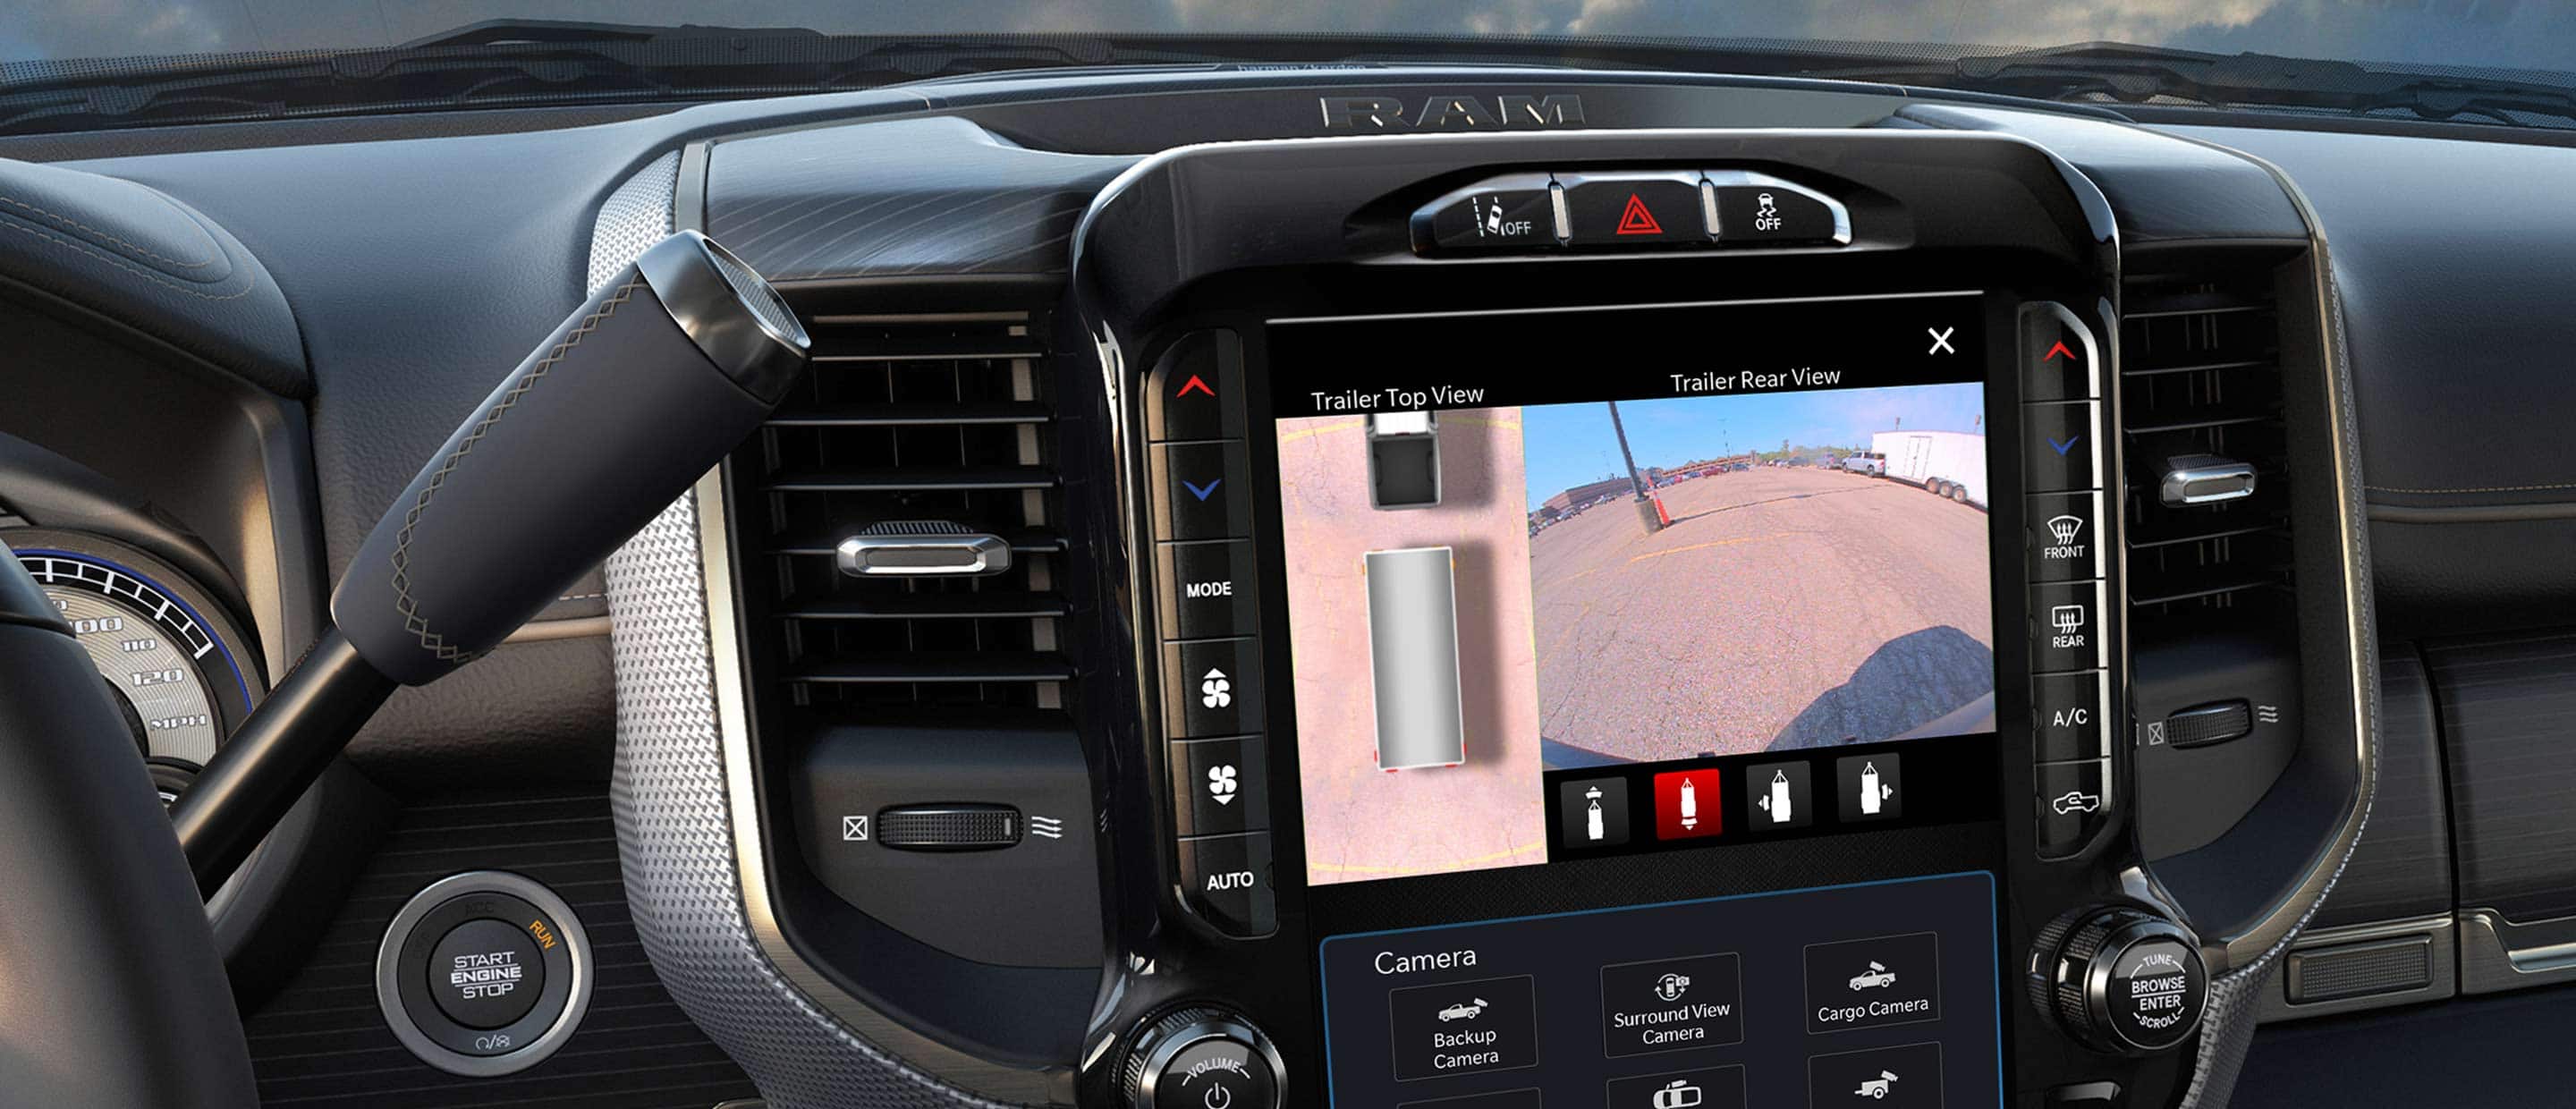 The touchscreen in the 2022 Ram Chassis Cab displaying a split screen with the trailer top view and trailer rear view from the surround view camera.